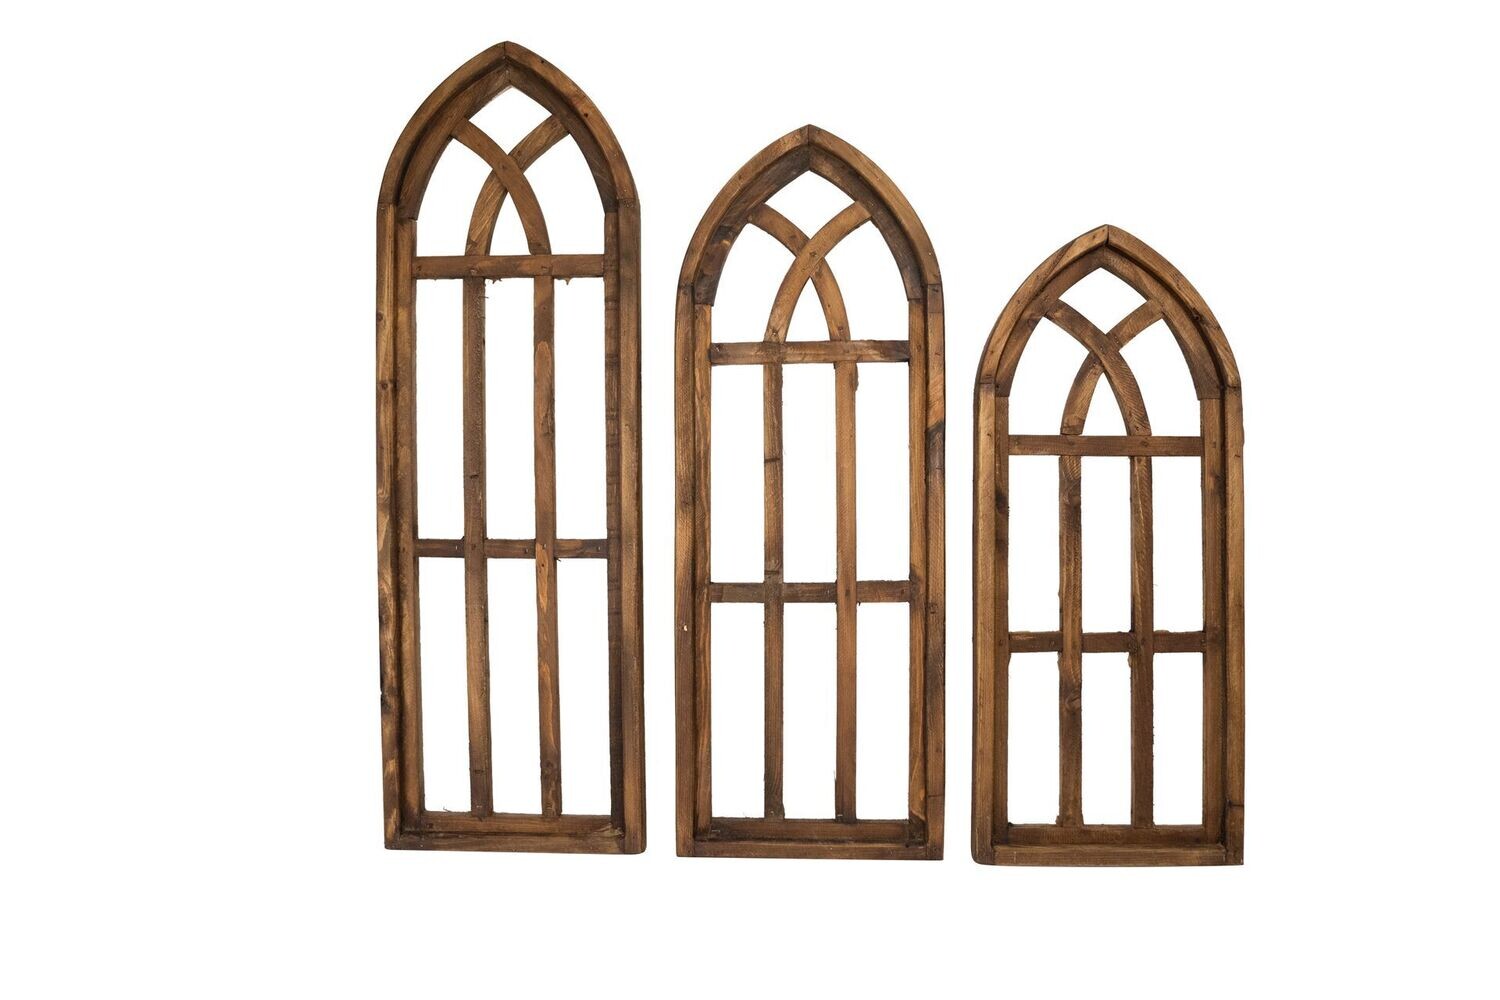 Cathedral Rustic Wall Decor Windows-Farmhouse Set of 3-Wax-Brown